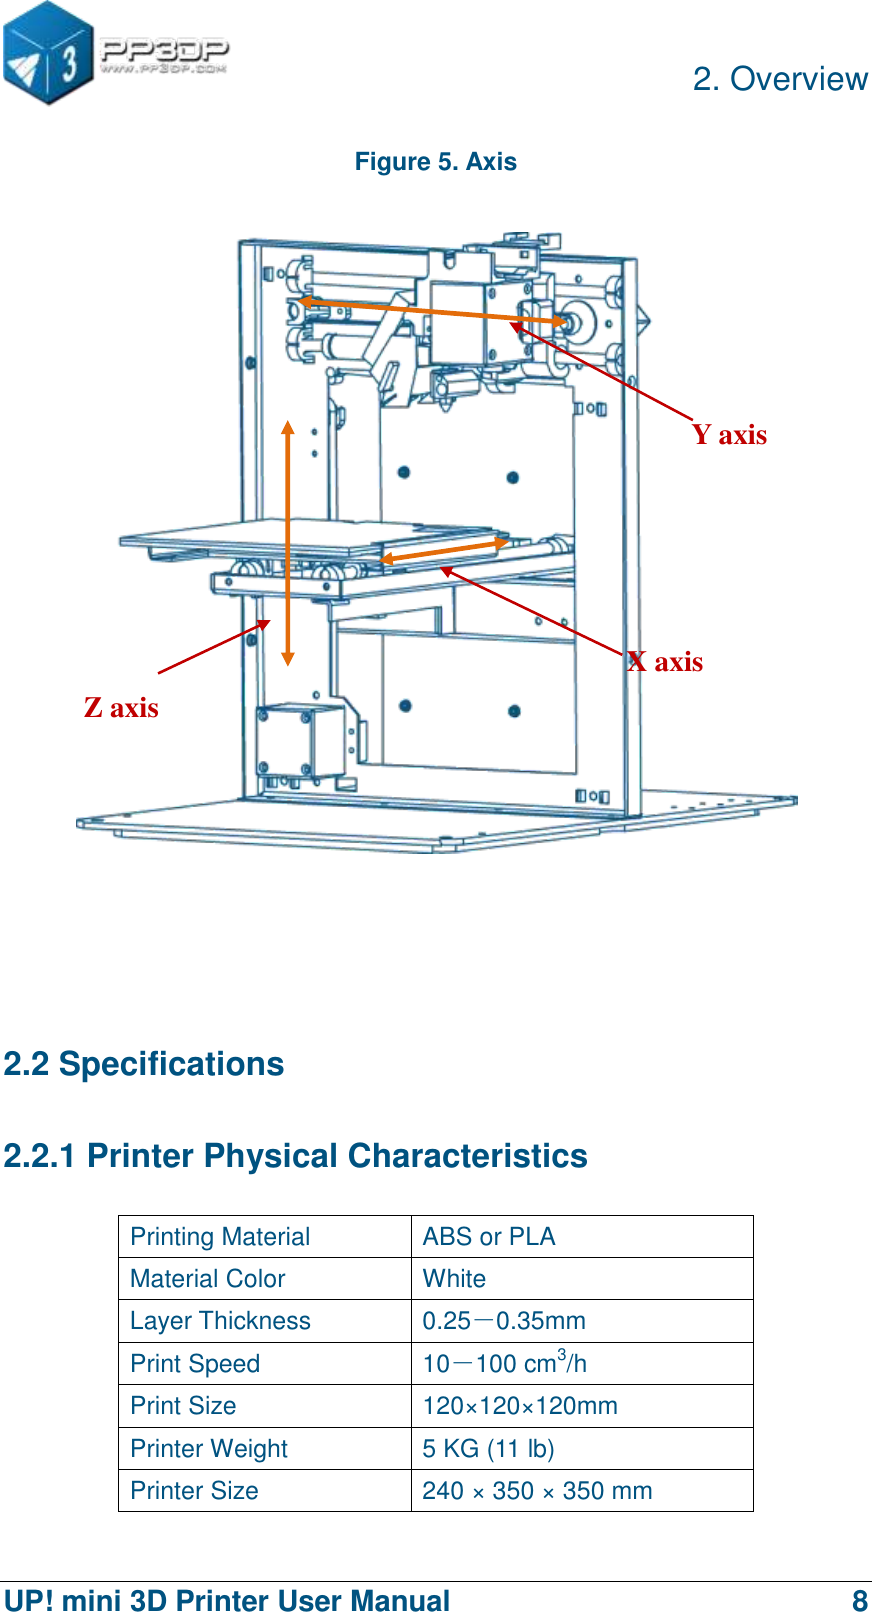          2. Overview  UP! mini 3D Printer User Manual                                8 Figure 5. Axis     2.2 Specifications 2.2.1 Printer Physical Characteristics Printing Material ABS or PLA Material Color White Layer Thickness 0.25－0.35mm Print Speed 10－100 cm3/h Print Size 120×120×120mm Printer Weight 5 KG (11 lb) Printer Size 240 ×  350 × 350 mm Y axis Z axis X axis 